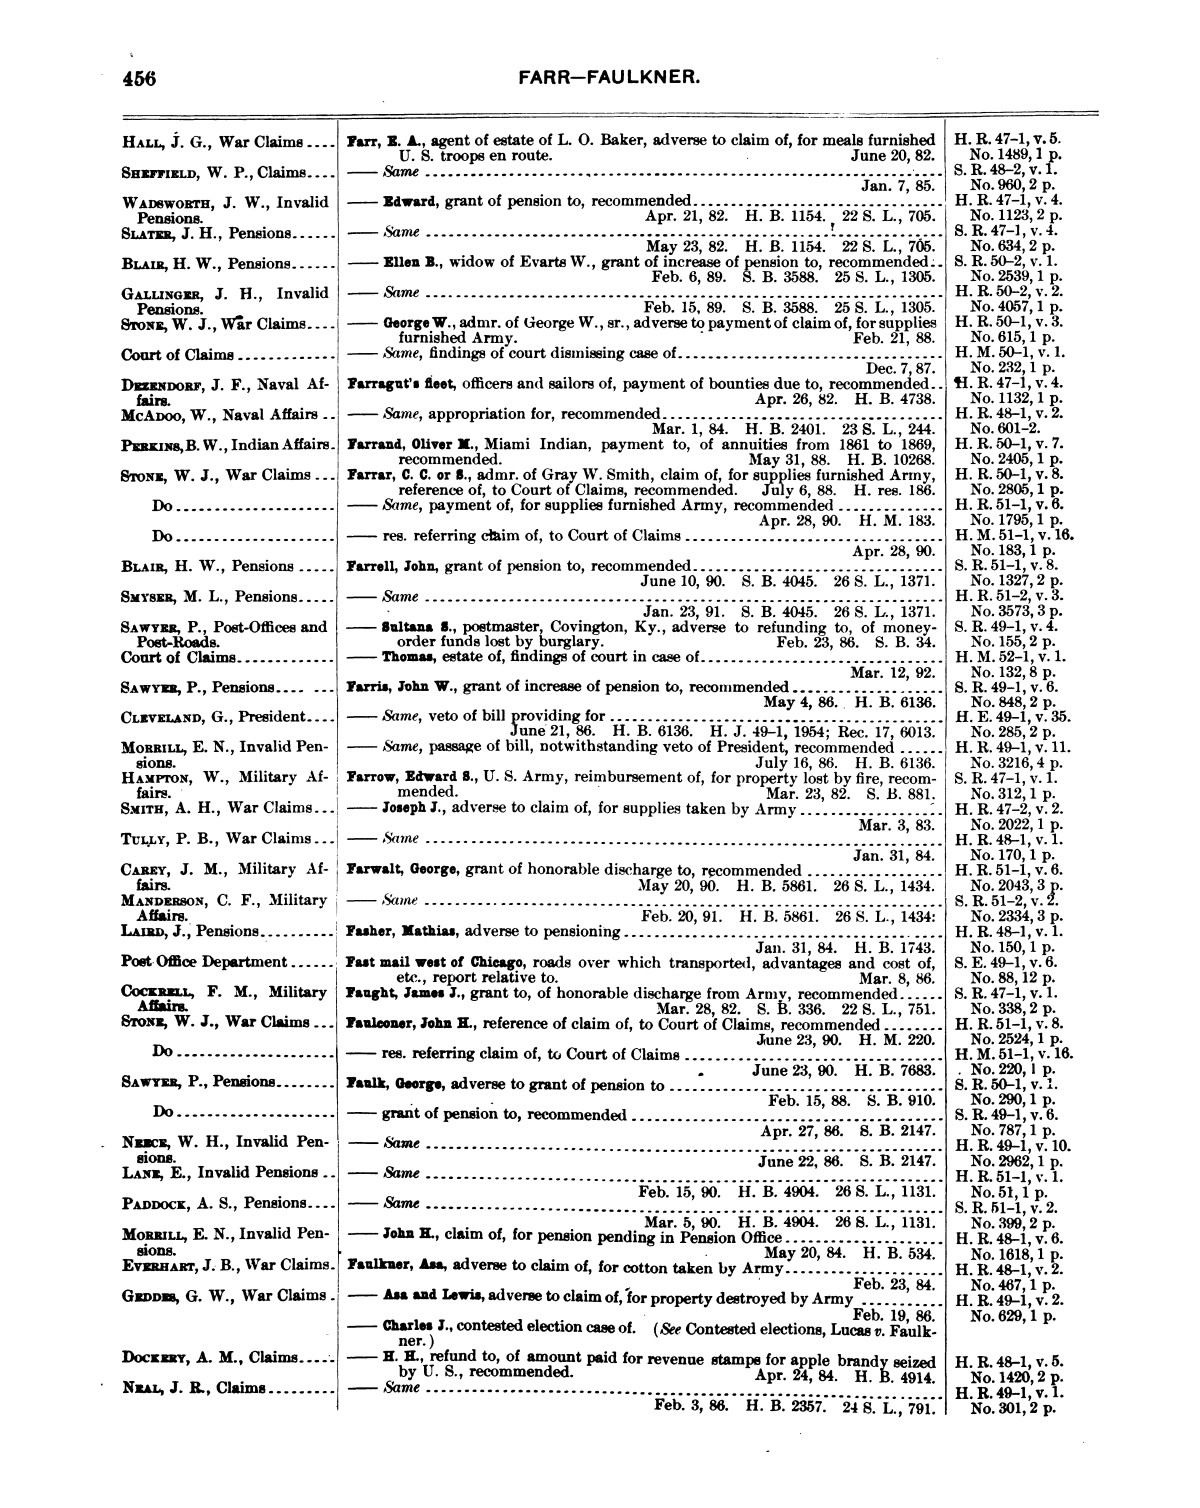 Comprehensive Index to the Publications of the United States Government, 1881-1893, Volume 1.
                                                
                                                    456
                                                